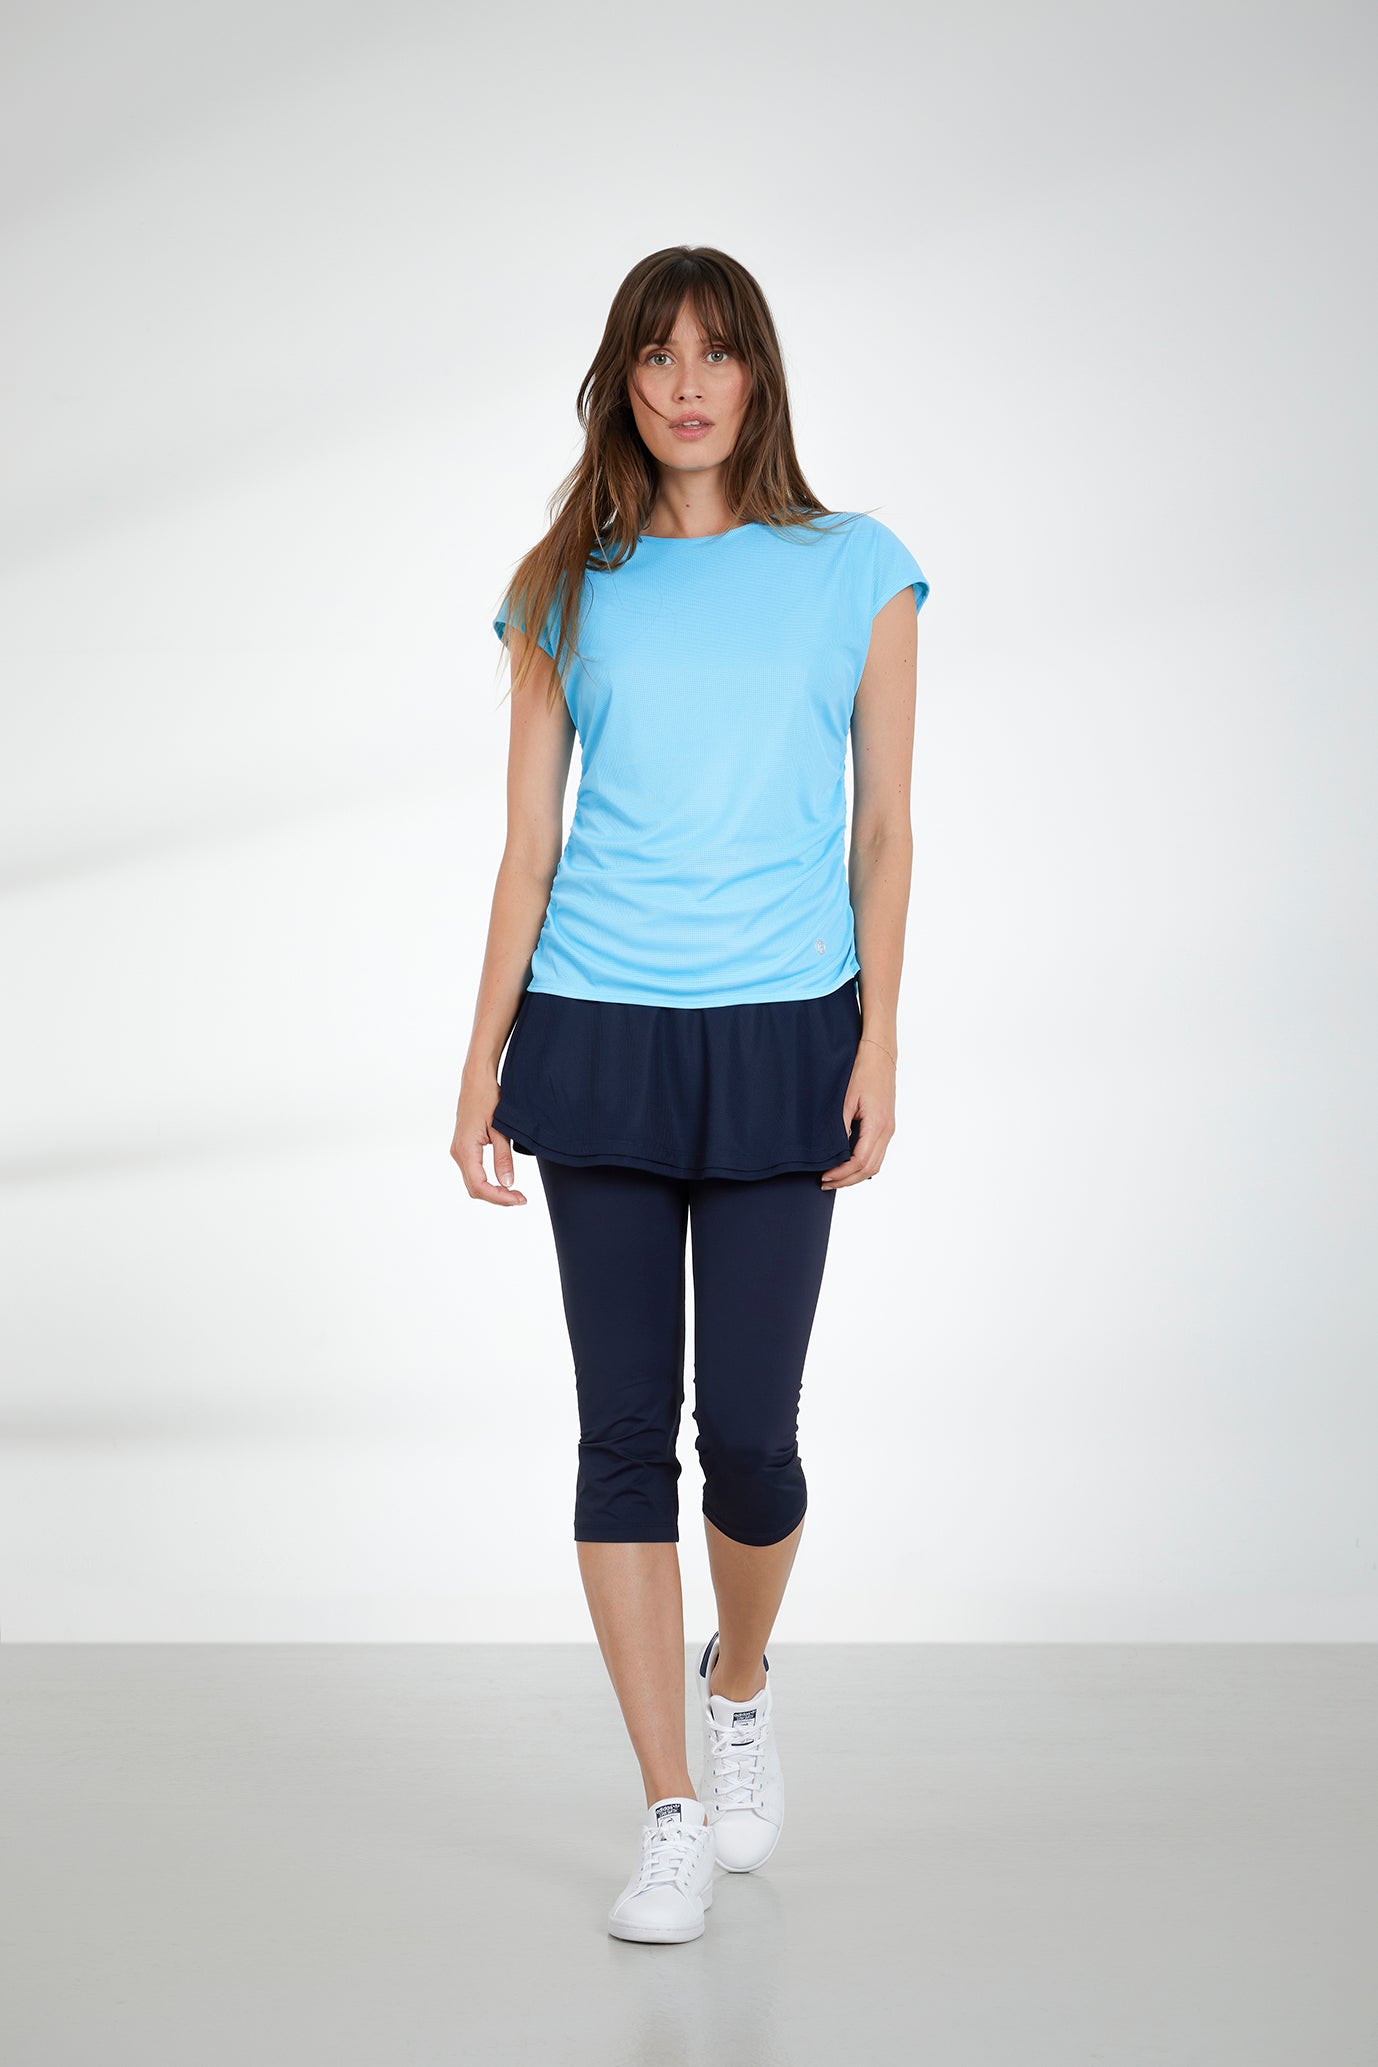 Women's Eco-Active Light capped sleeve T-shirt 2101 in Oxford Blue